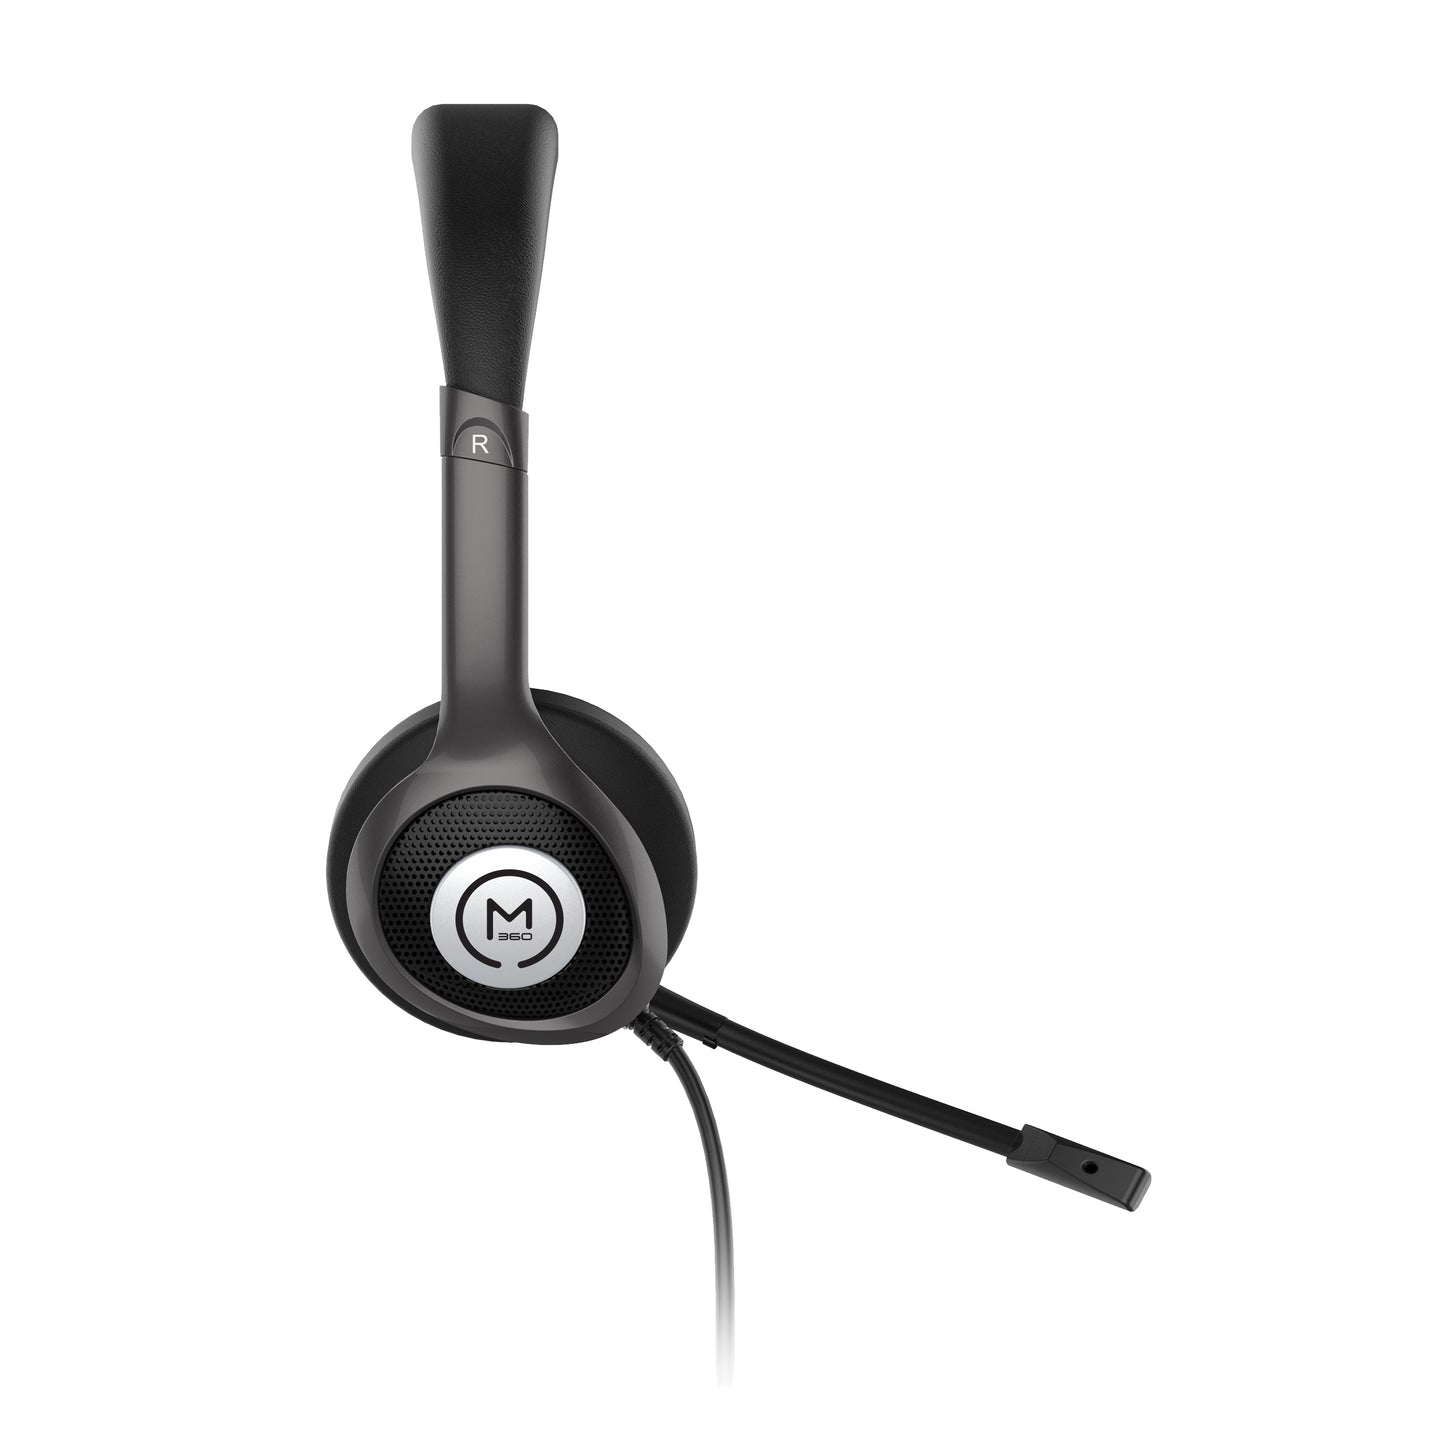 Right profile image of the Connect USB Stereo Headset with Boom Microphone